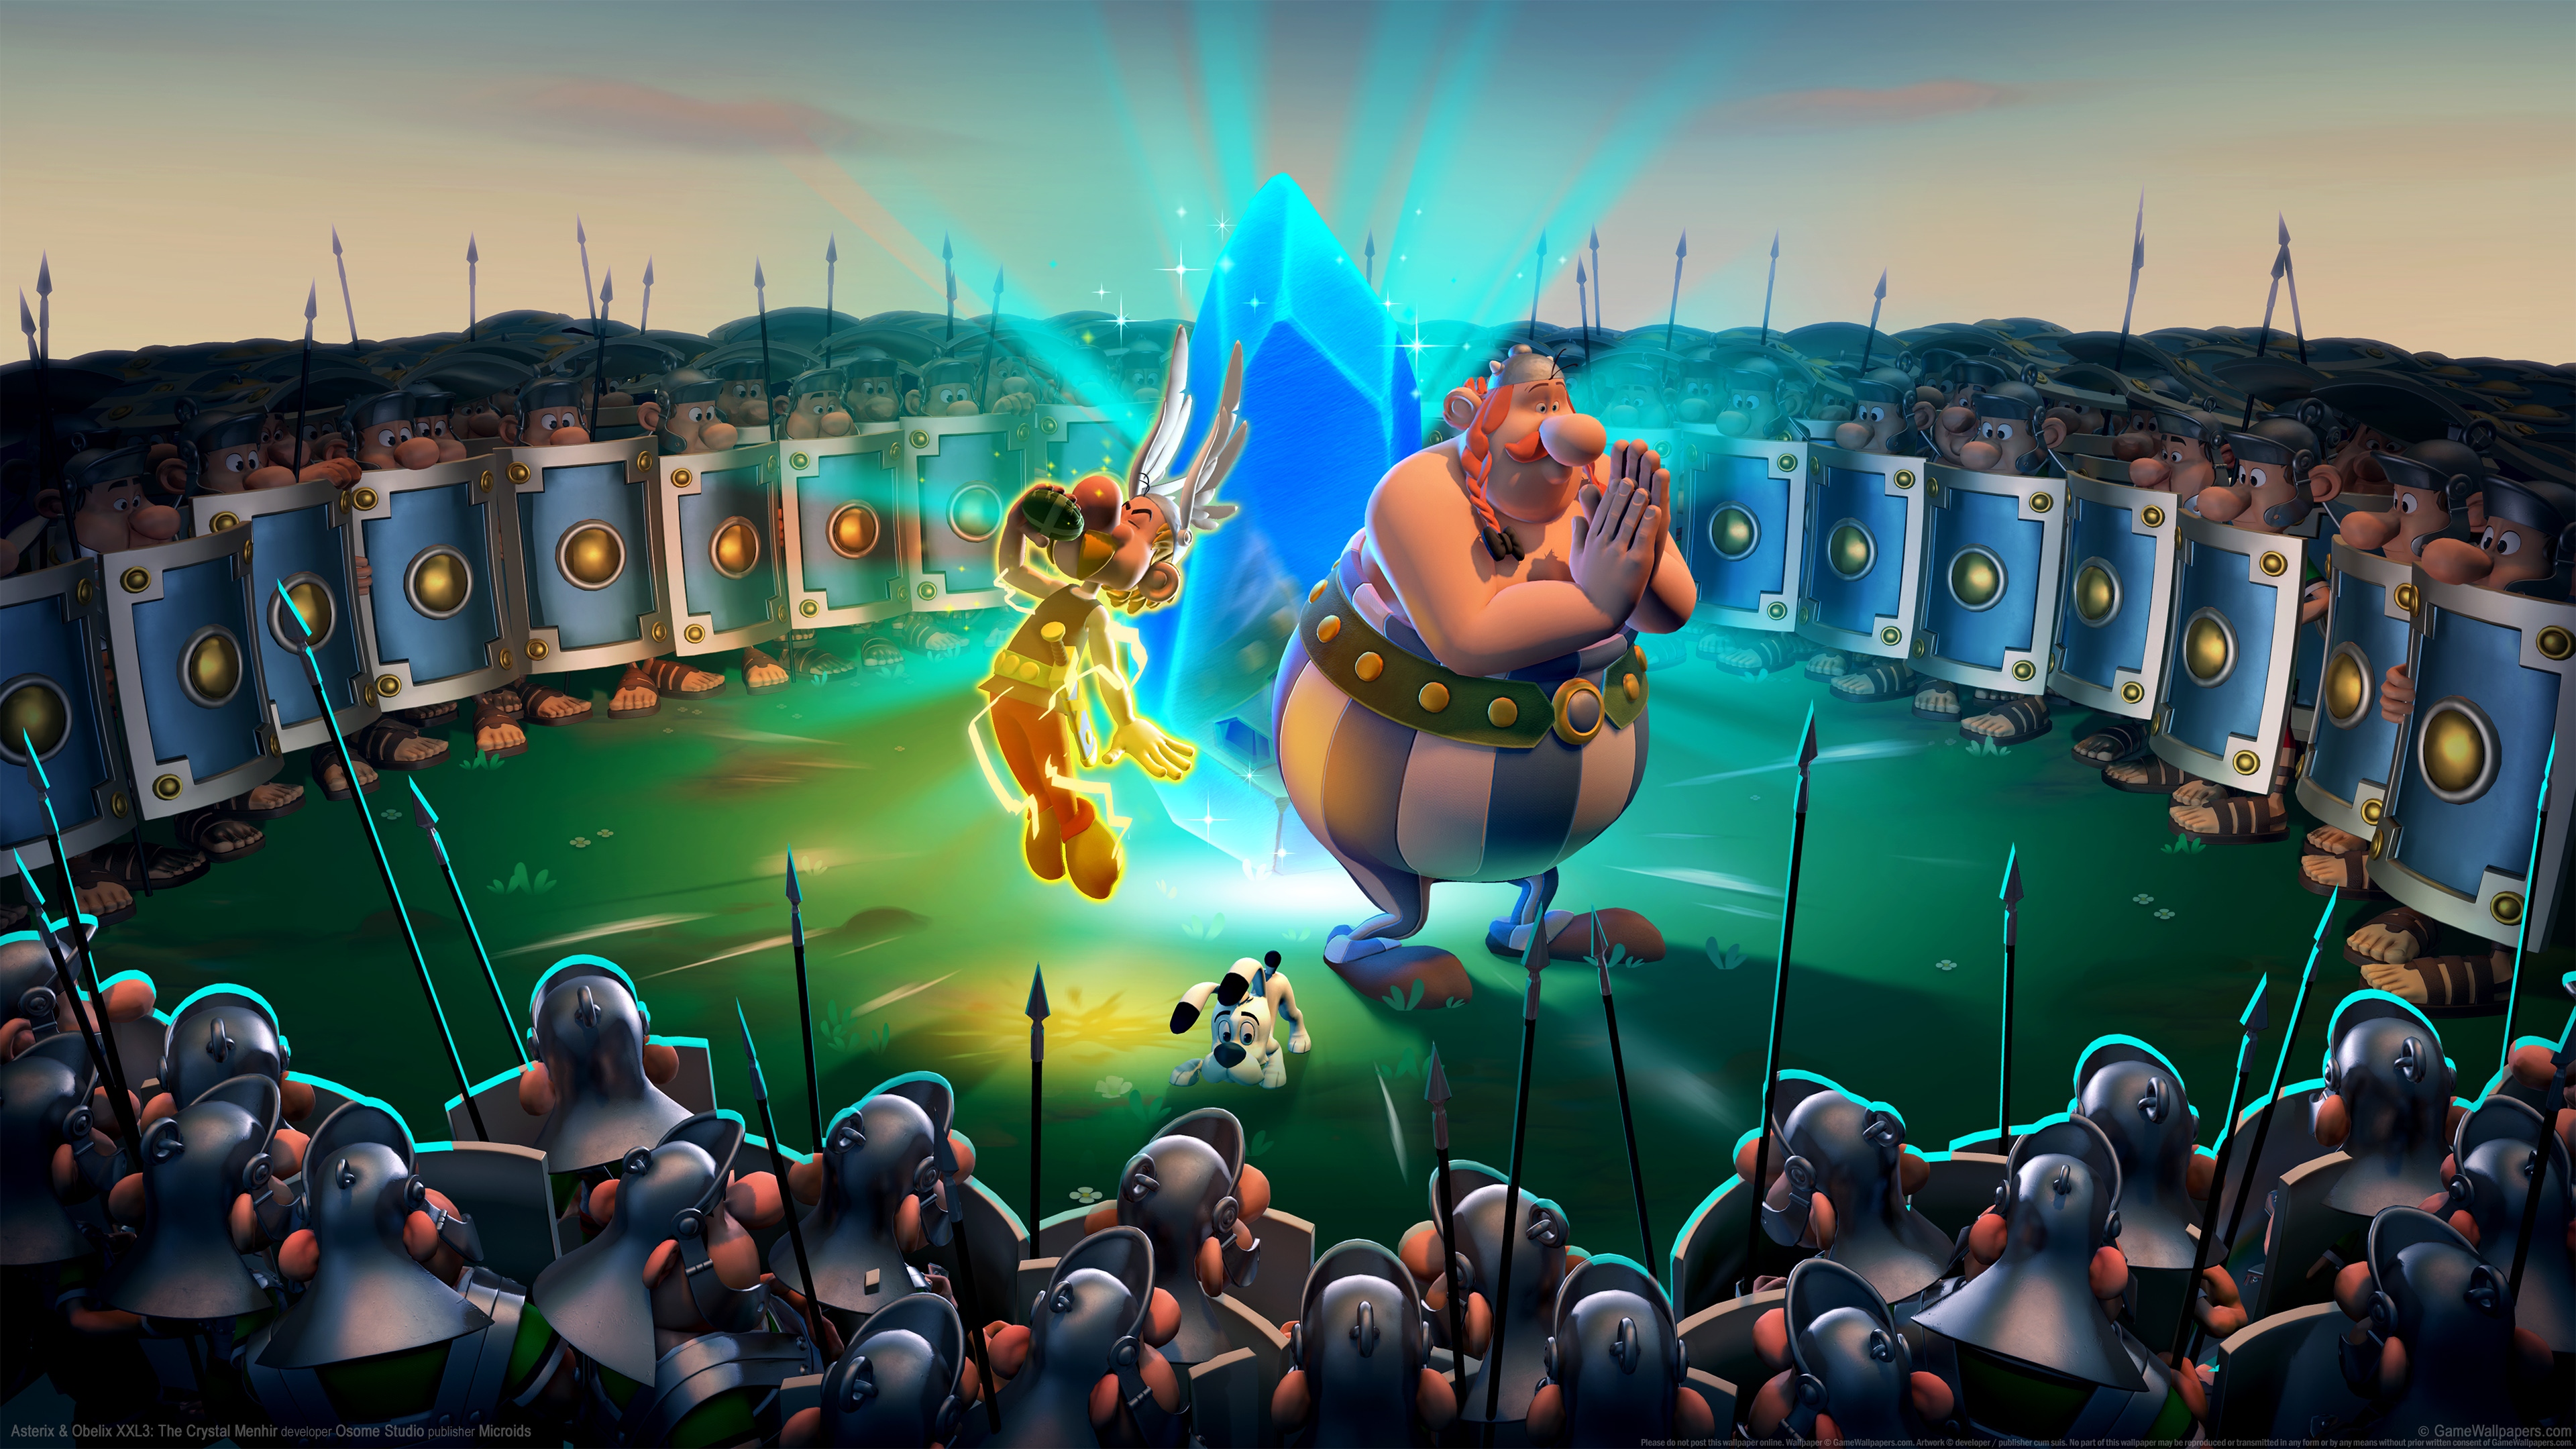 Asterix & Obelix XXL3: The Crystal Menhir 3840x2160 wallpaper or background 01